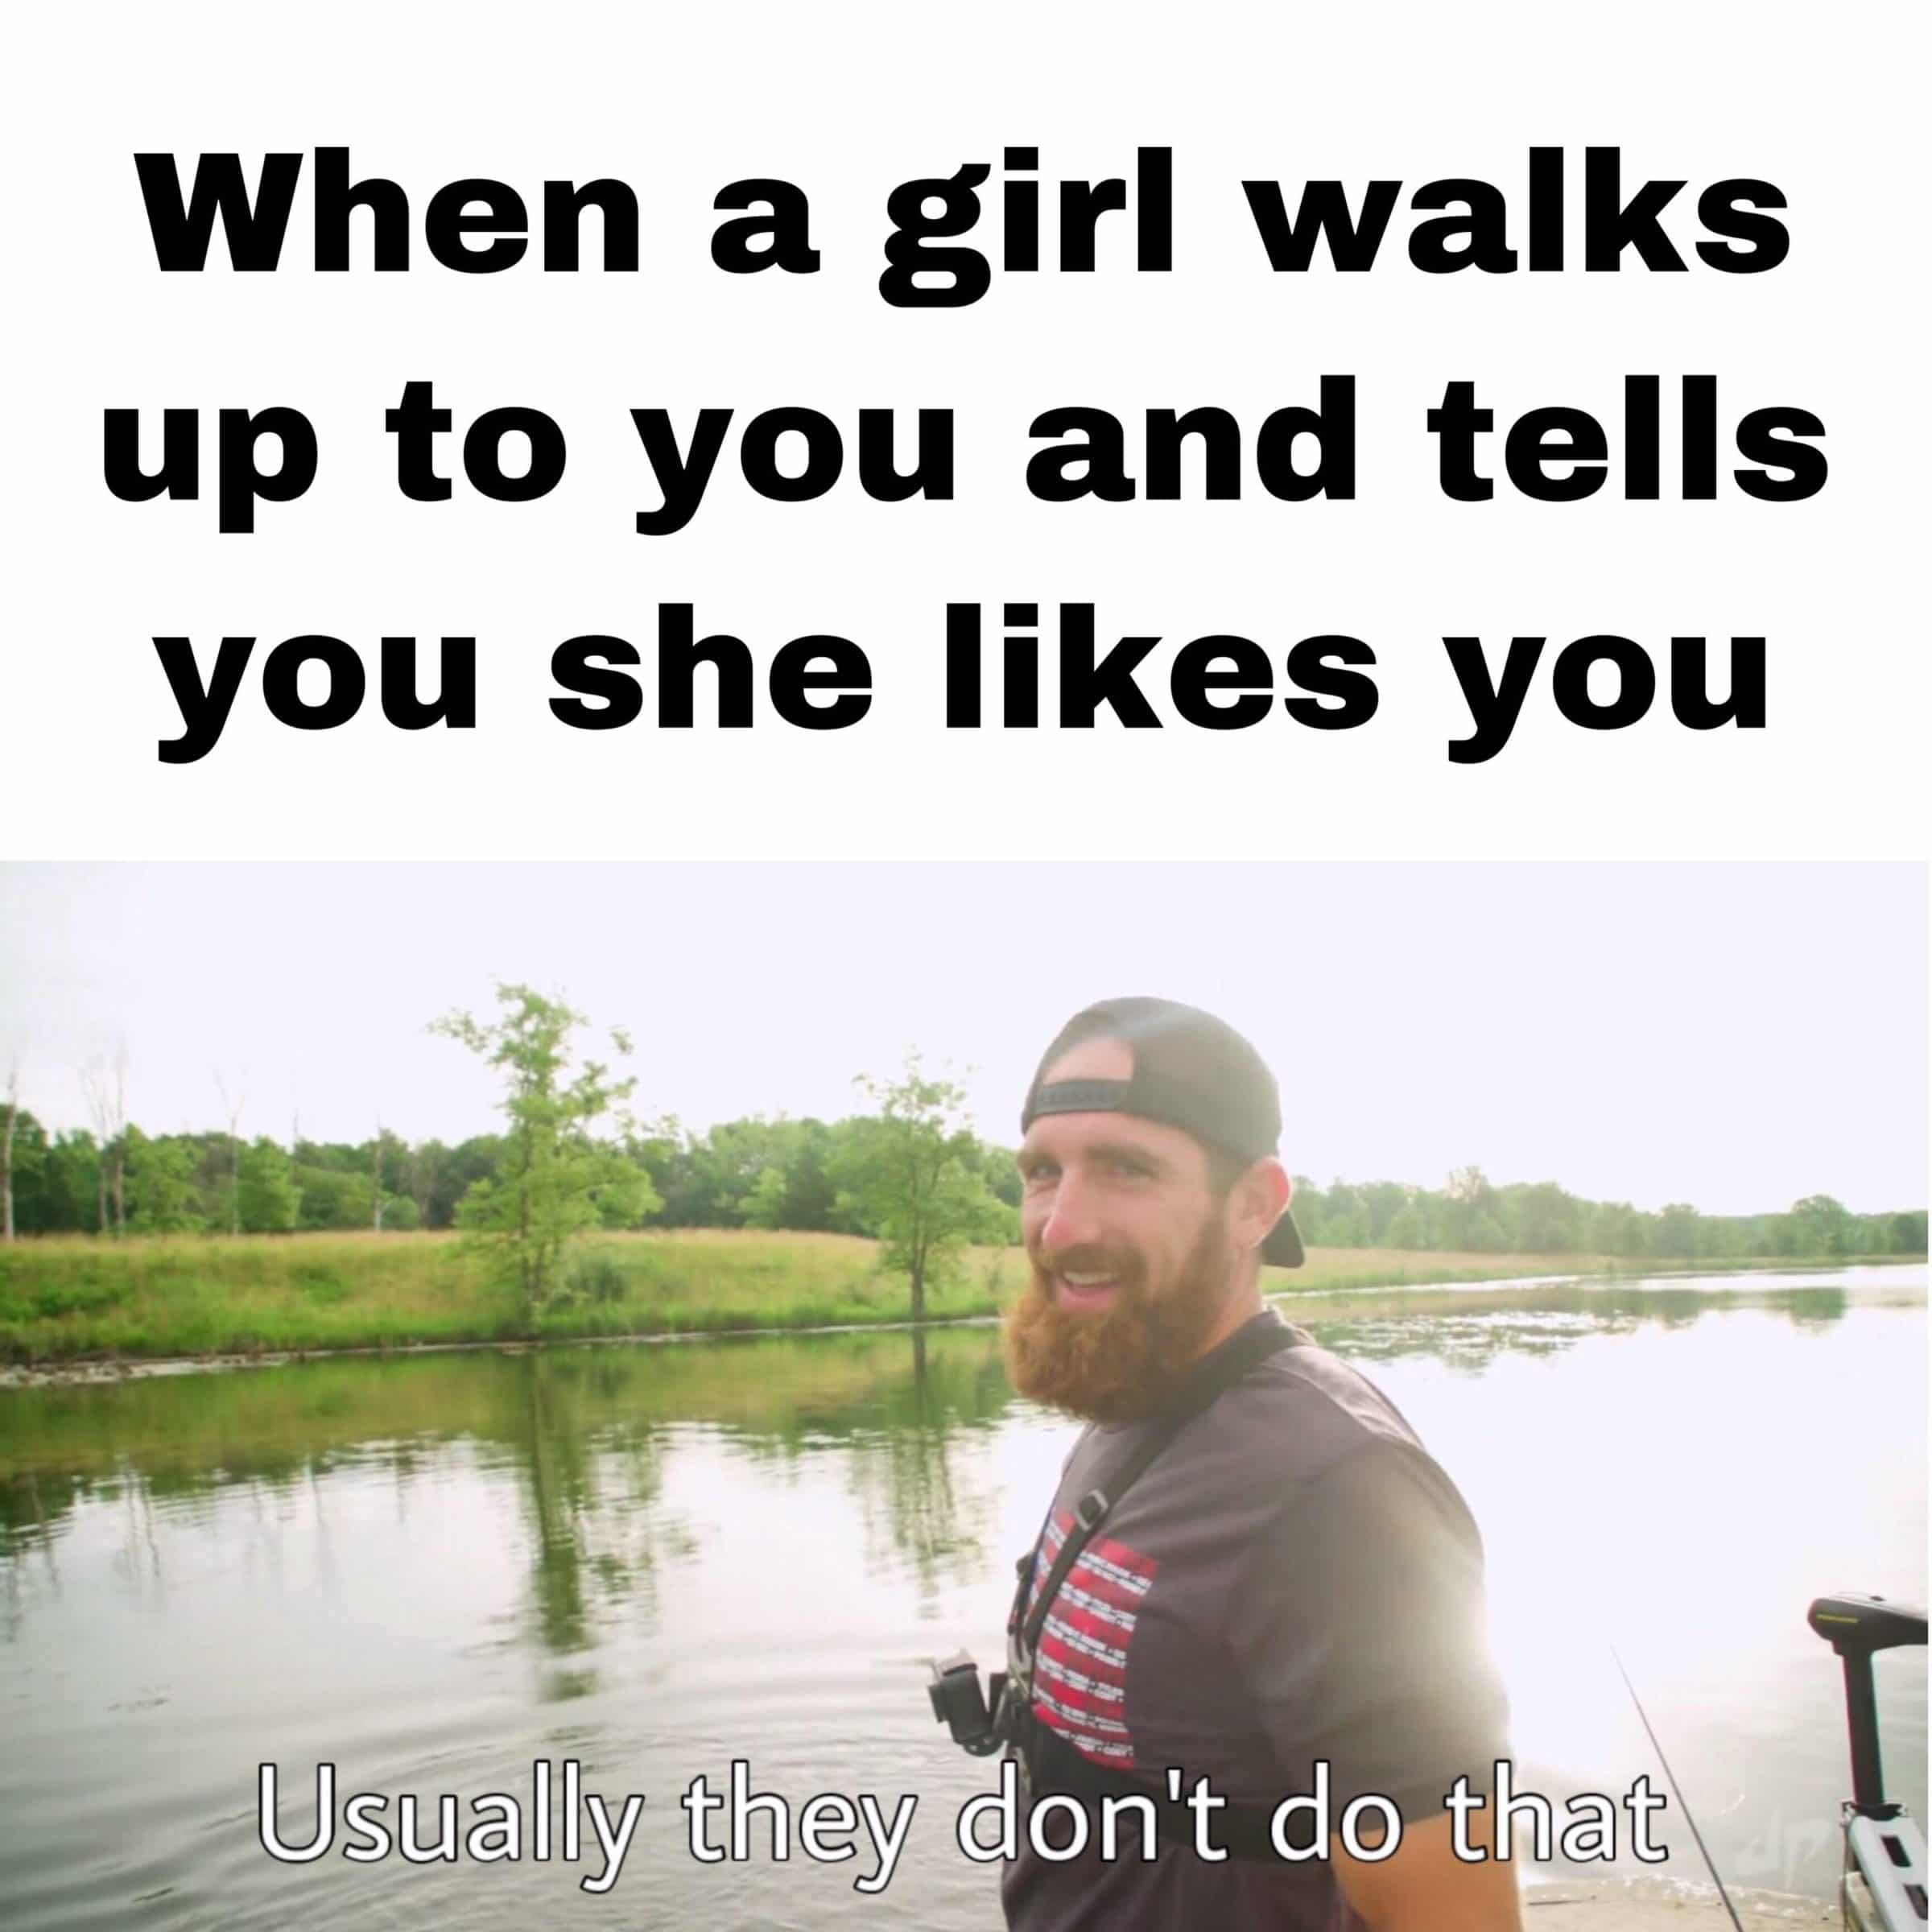 depression depression-memes depression text: When a girl walks up to you and tells you she likes you EVG]lj4hey: don't do-tvt 